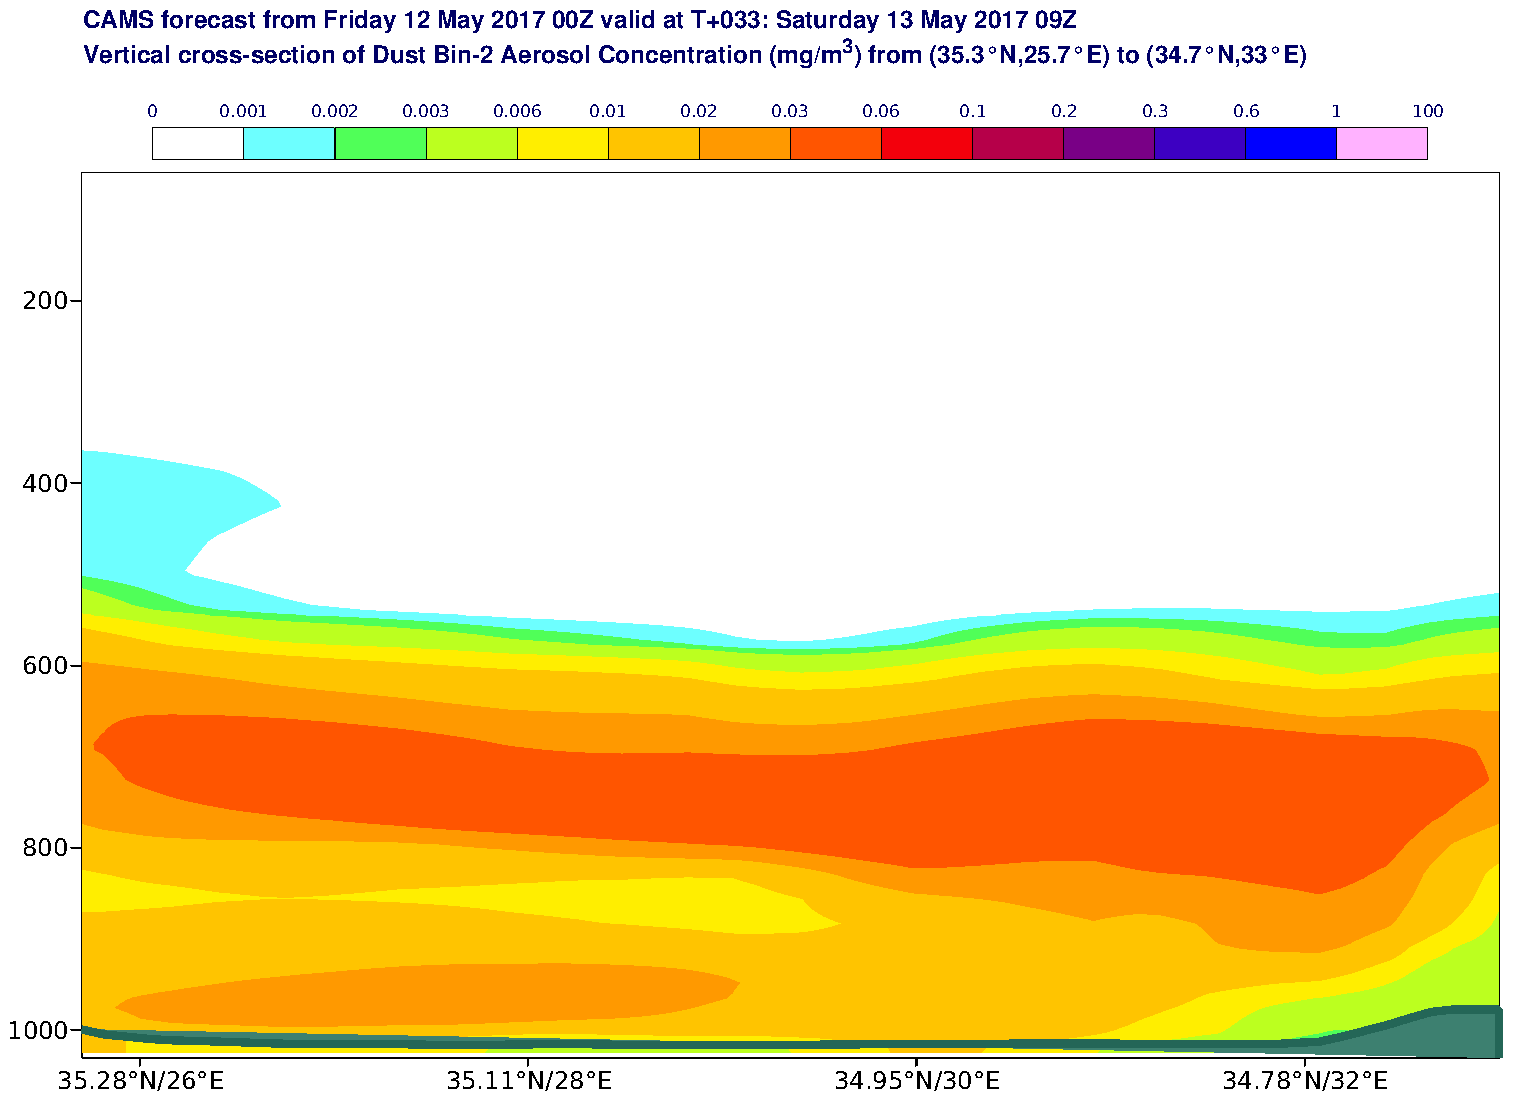 Vertical cross-section of Dust Bin-2 Aerosol Concentration (mg/m3) valid at T33 - 2017-05-13 09:00